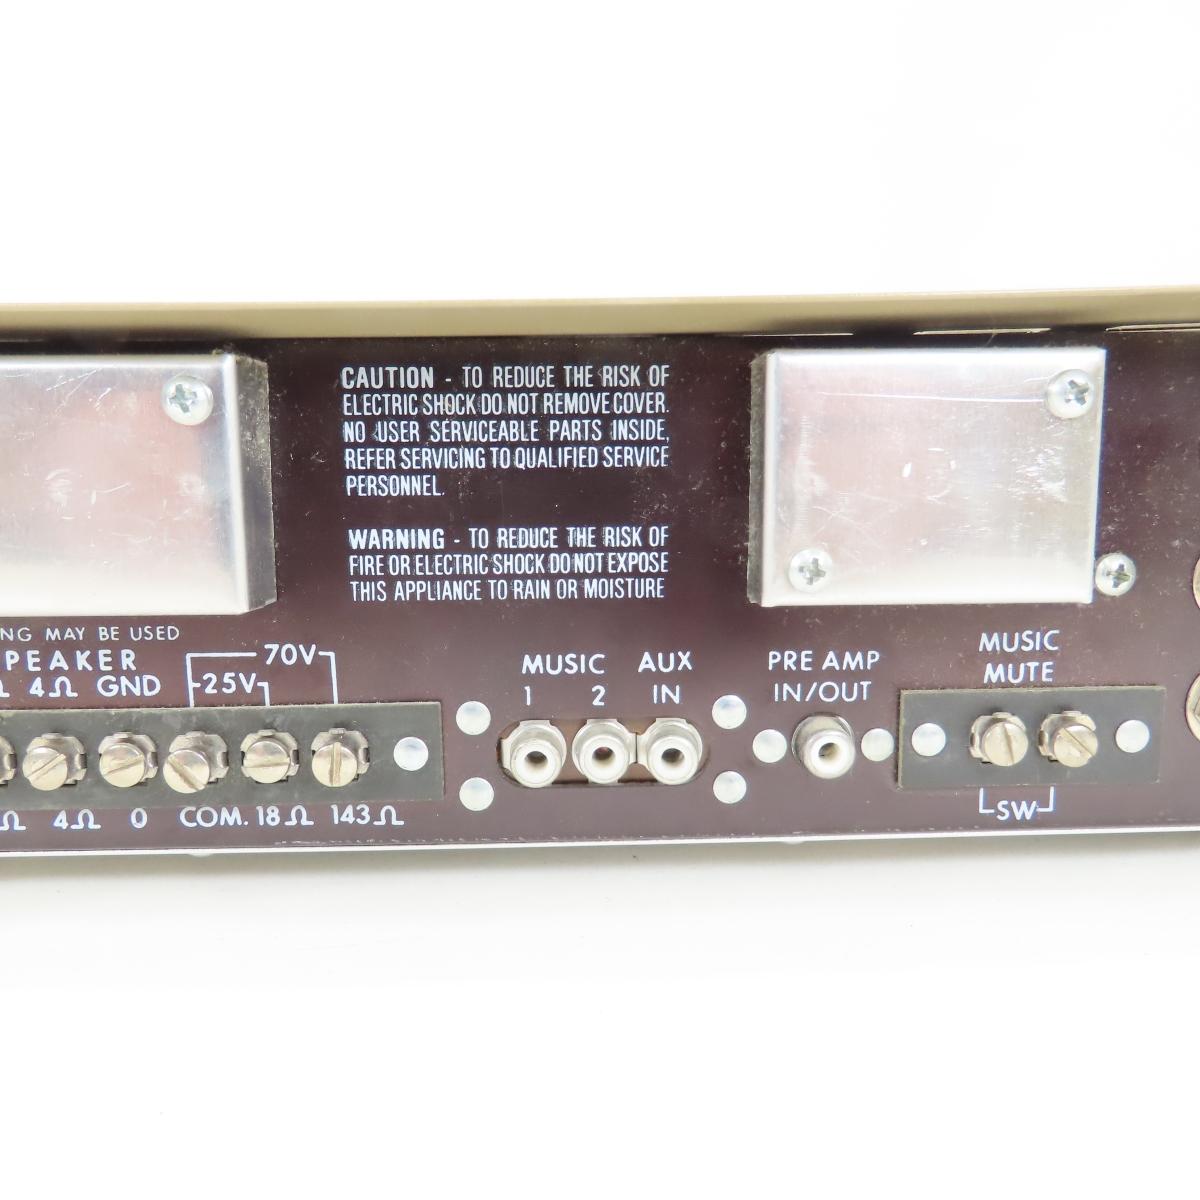 Raymer 800-35A Solid State Amplifier